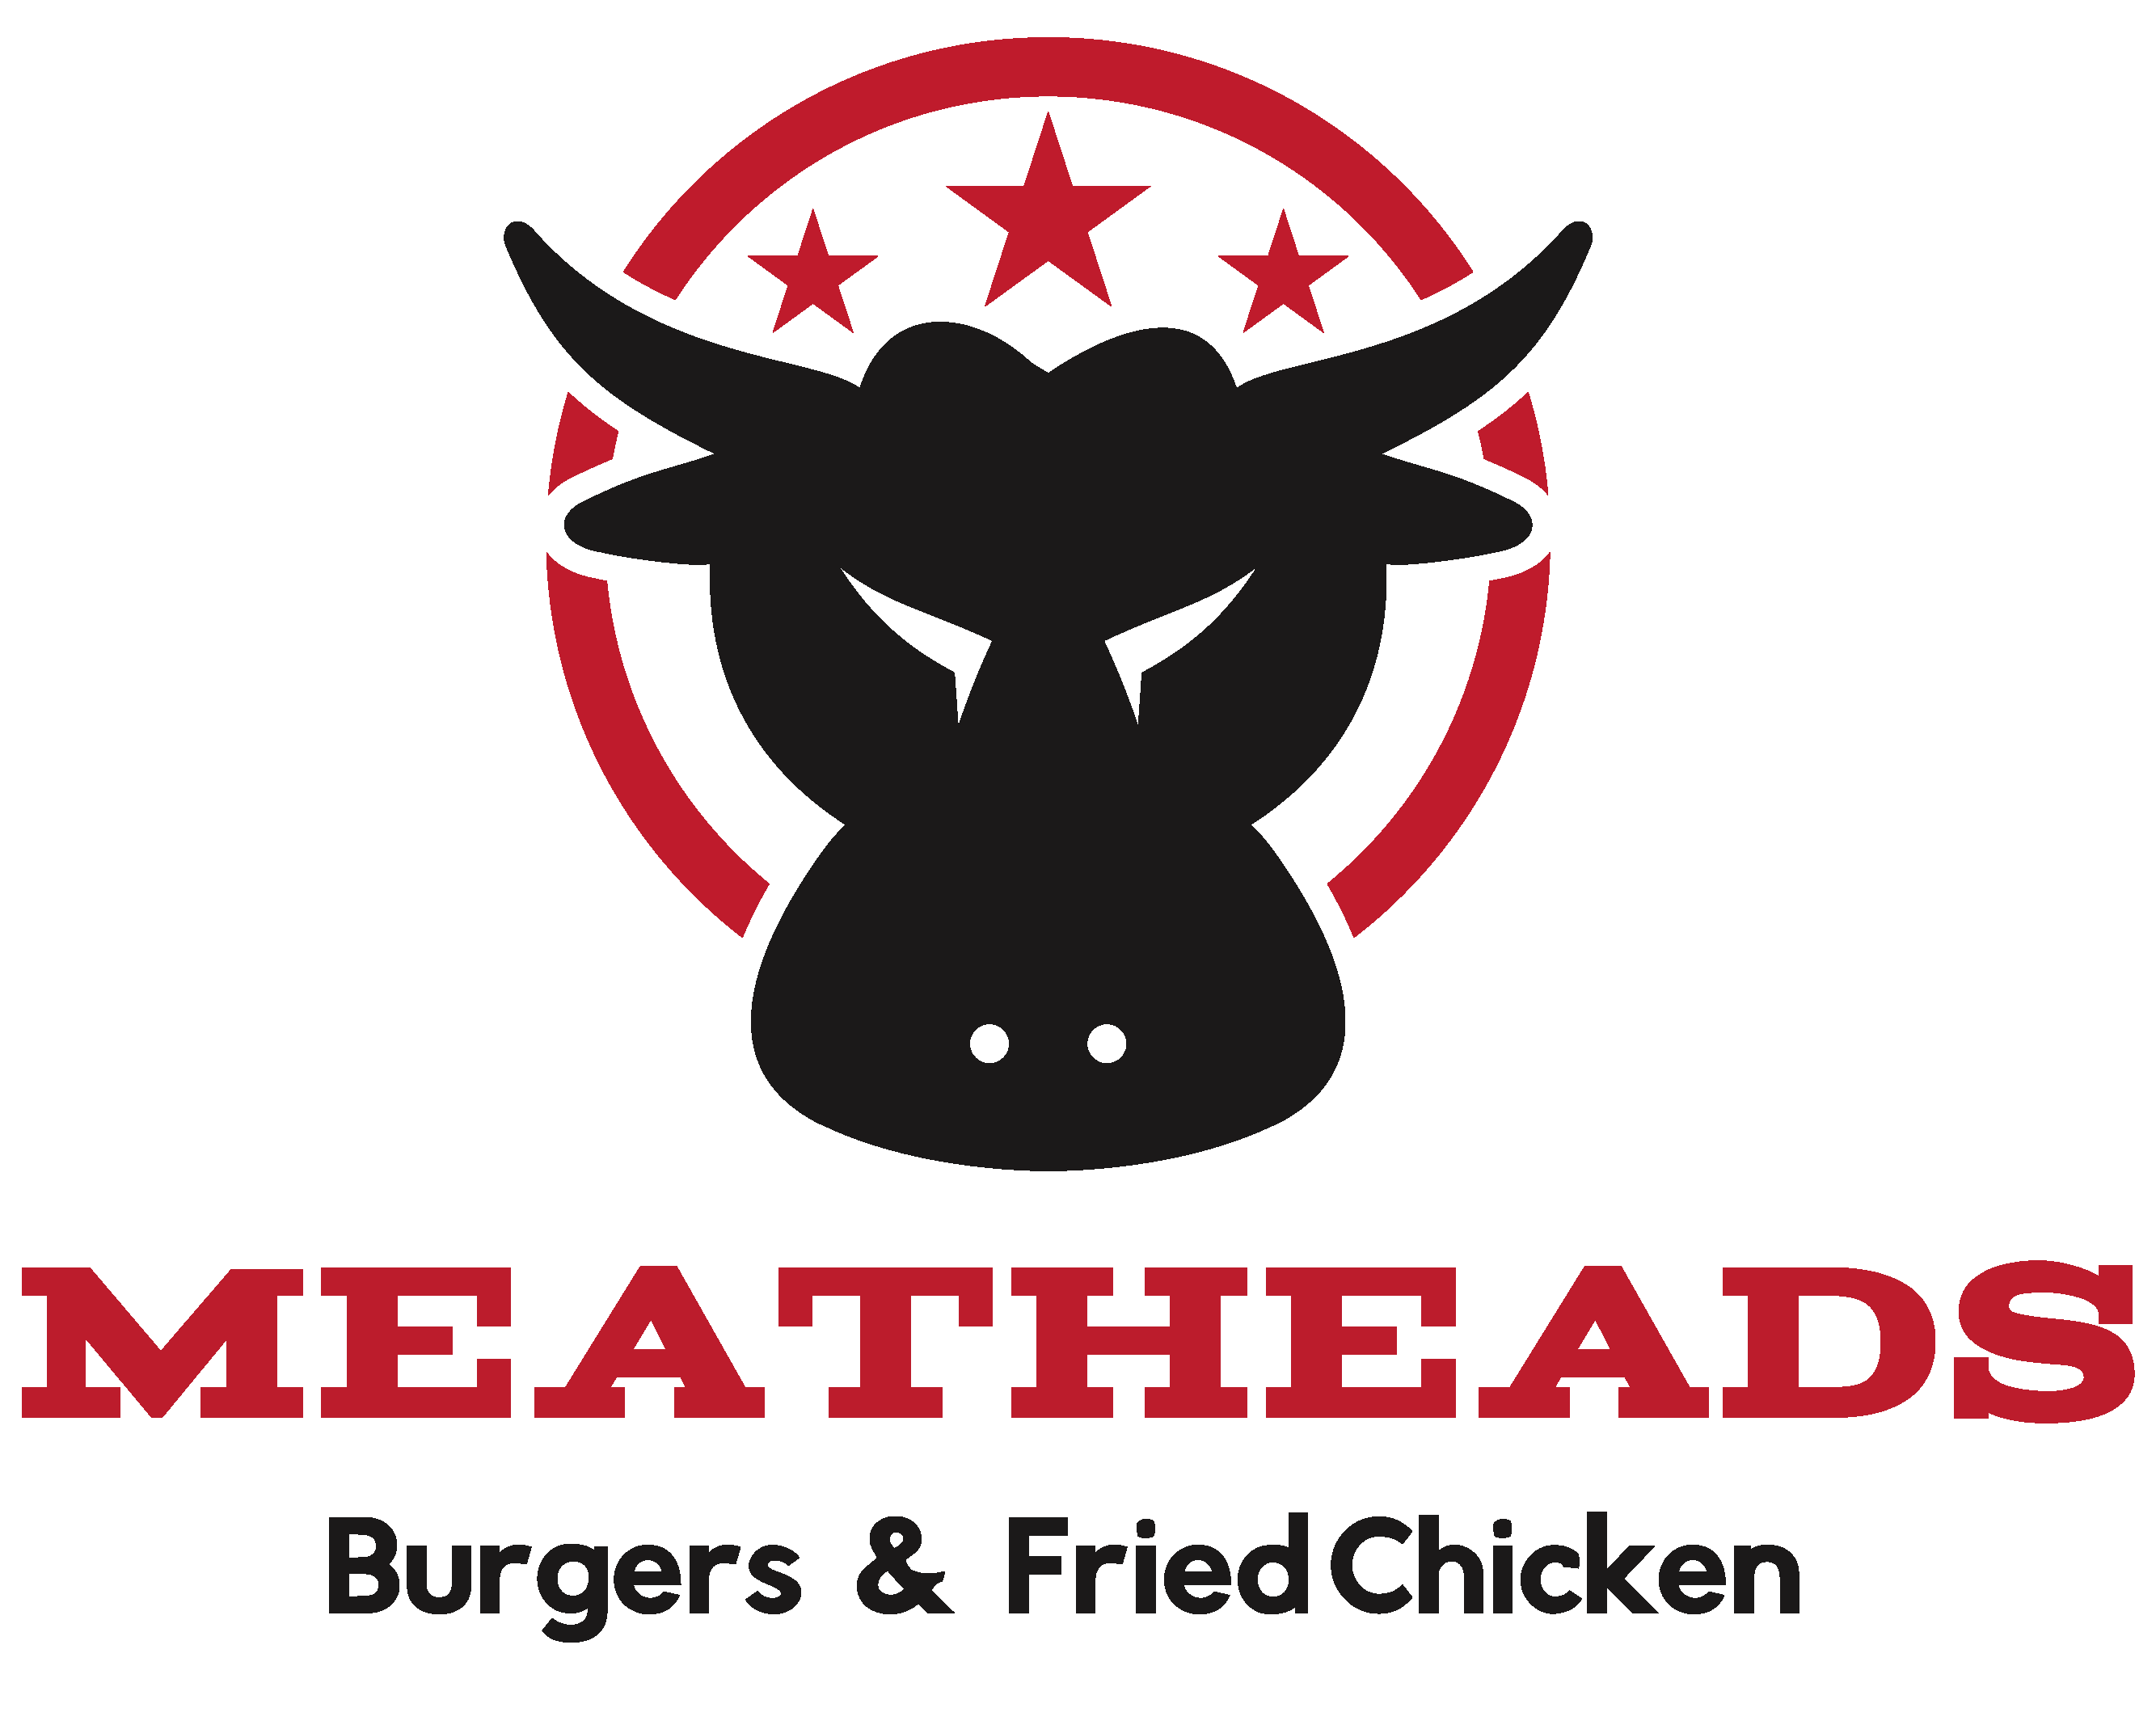 Meatheads Burgers and Fried Chicken